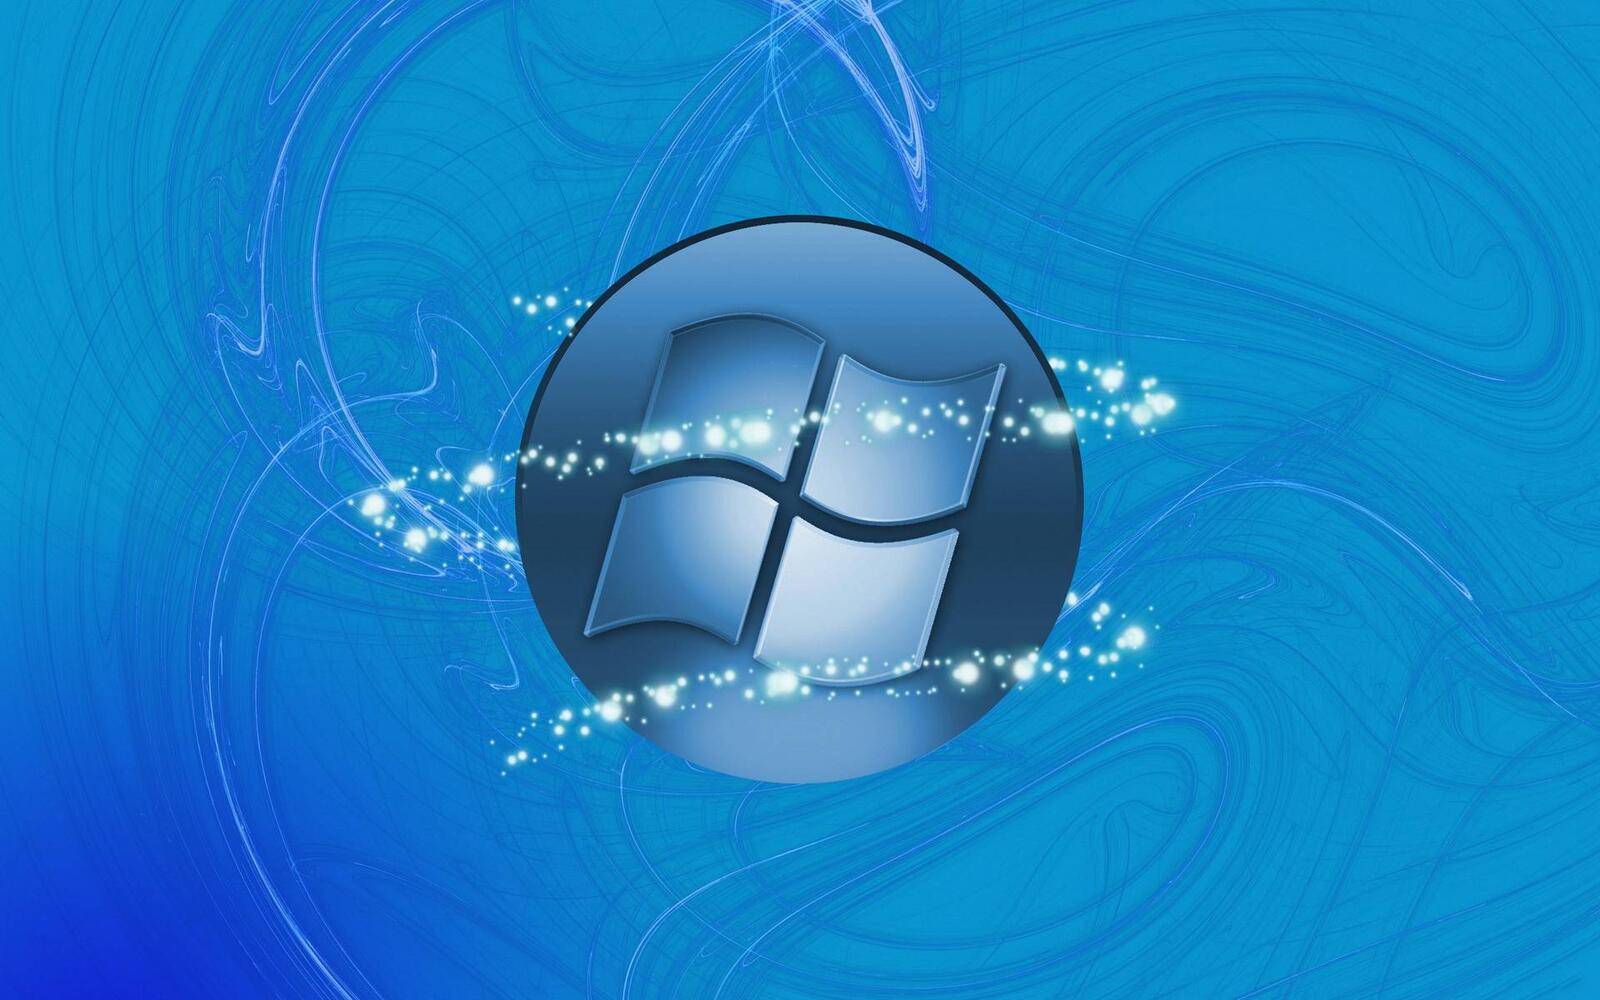 Wallpapers windrows emblem logo on the desktop